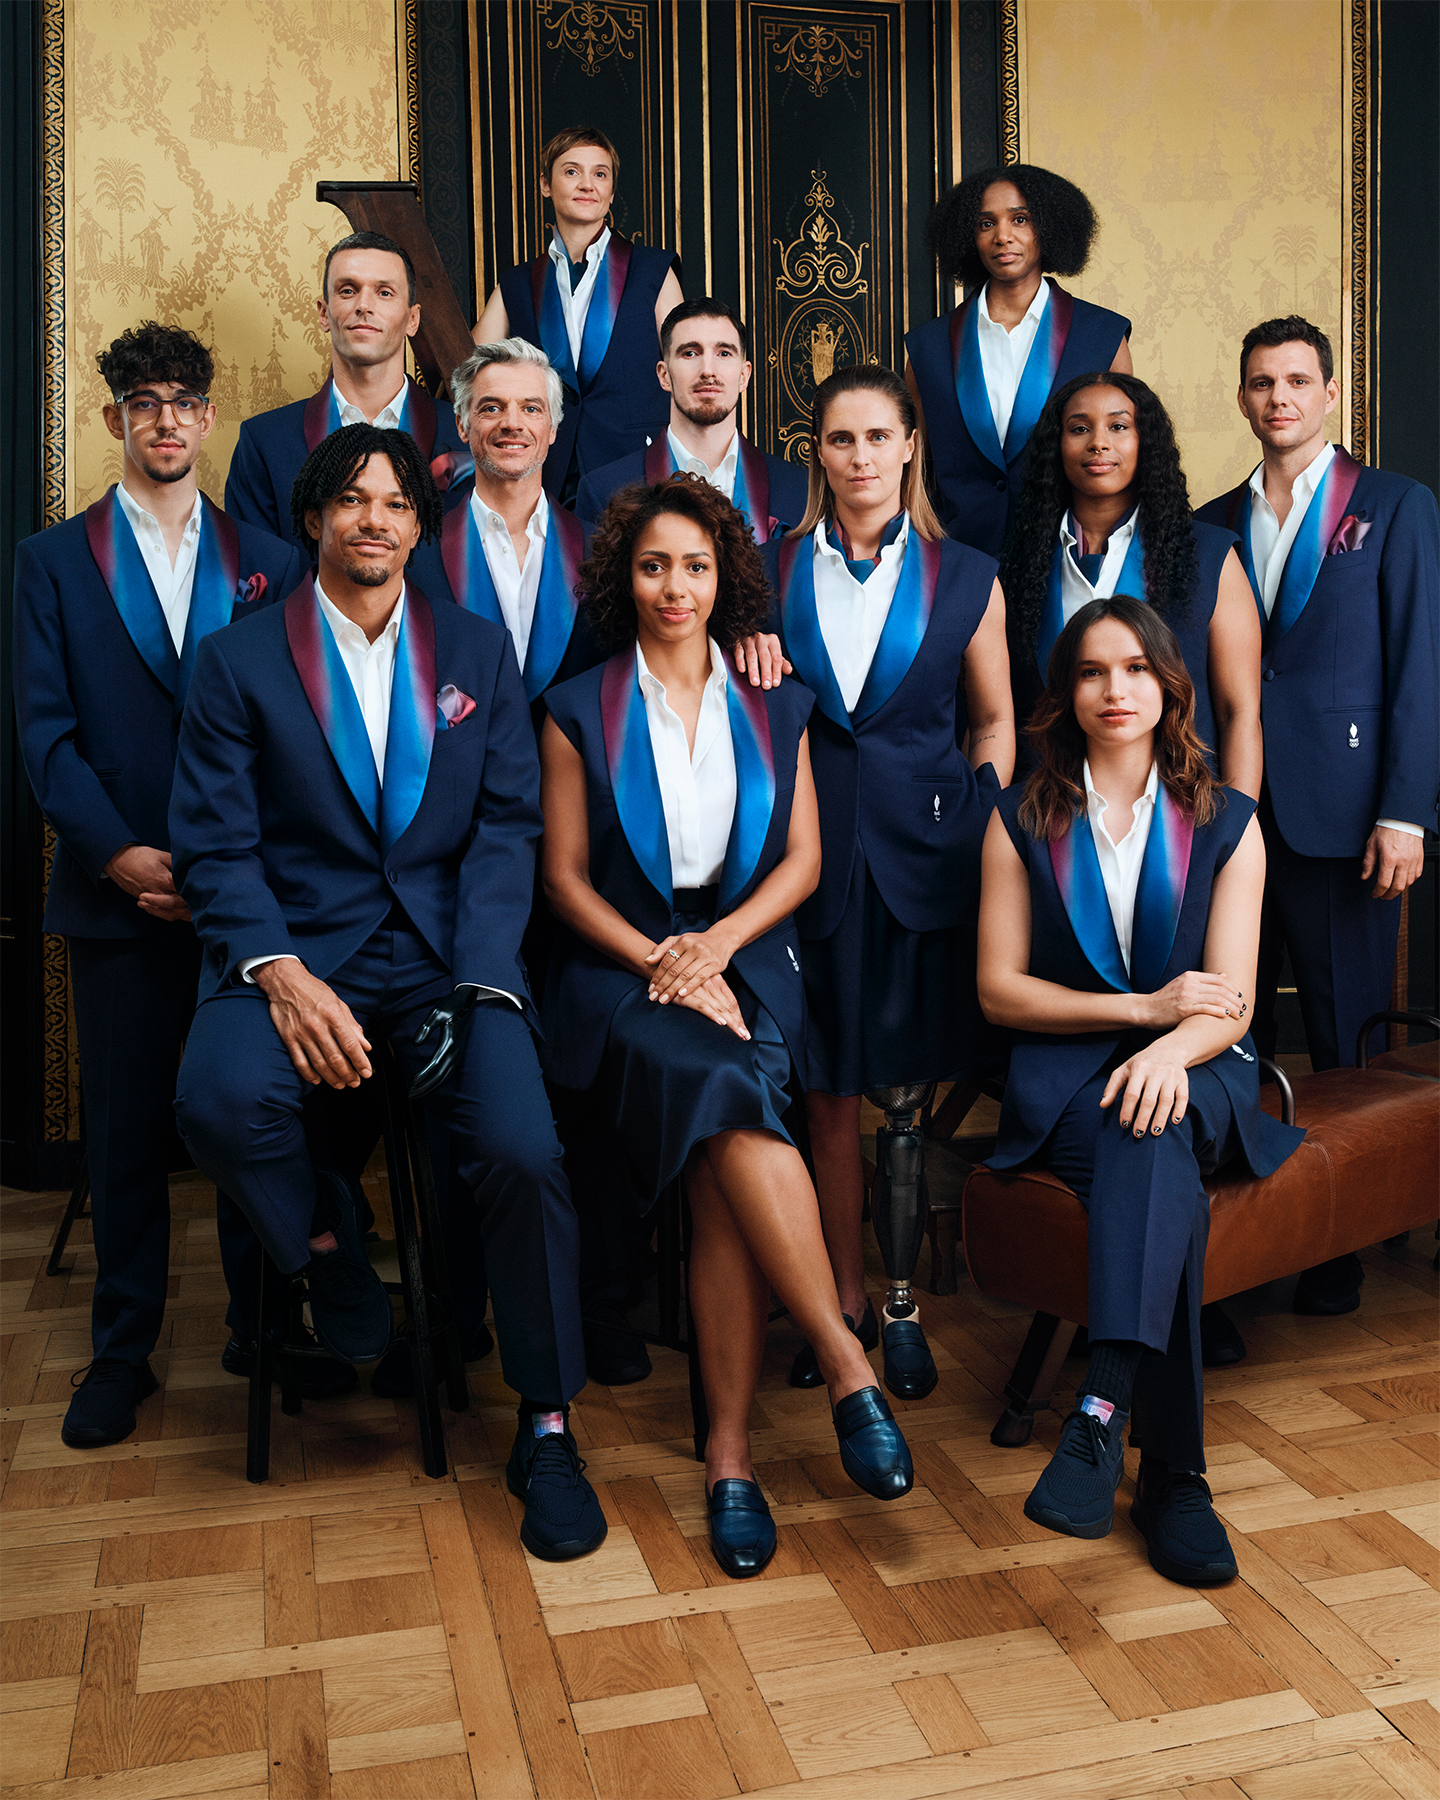 LVMH and Berluti revealed Team France’s outfits for the Opening Ceremonies of the Olympic and Paralympic Games Paris 2024. Left to right: Alexandre Léauté, Arnaud Assoumani, Alexis Hanquinquant, Karim Laghouag, Laure Thibaud-Obry, Estelle Mossely, Nando de Colo, Pauline Déroulède, Marie-Florence Candassamy, Gloria Agblemagnon, Oriane Bertone and Paul-Henri Mathieu. Photo by Kacper Kasprzyk, courtesy of Berluti